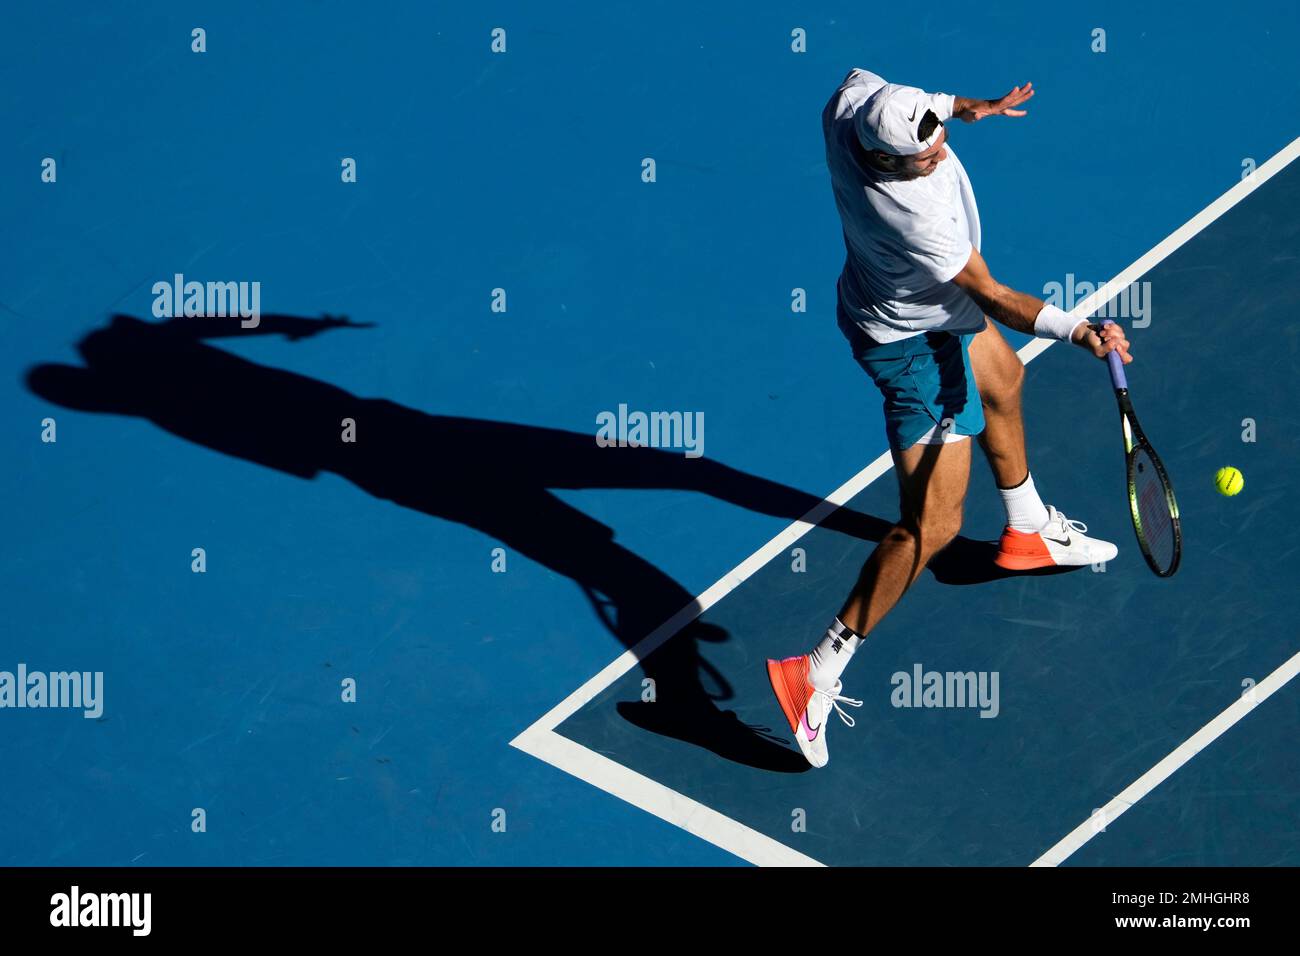 Karen Khachanov of Russia plays a forehand return to Stefanos Tsitsipas of Greece during their semifinal match at the Australian Open tennis championship in Melbourne, Australia, Friday, Jan